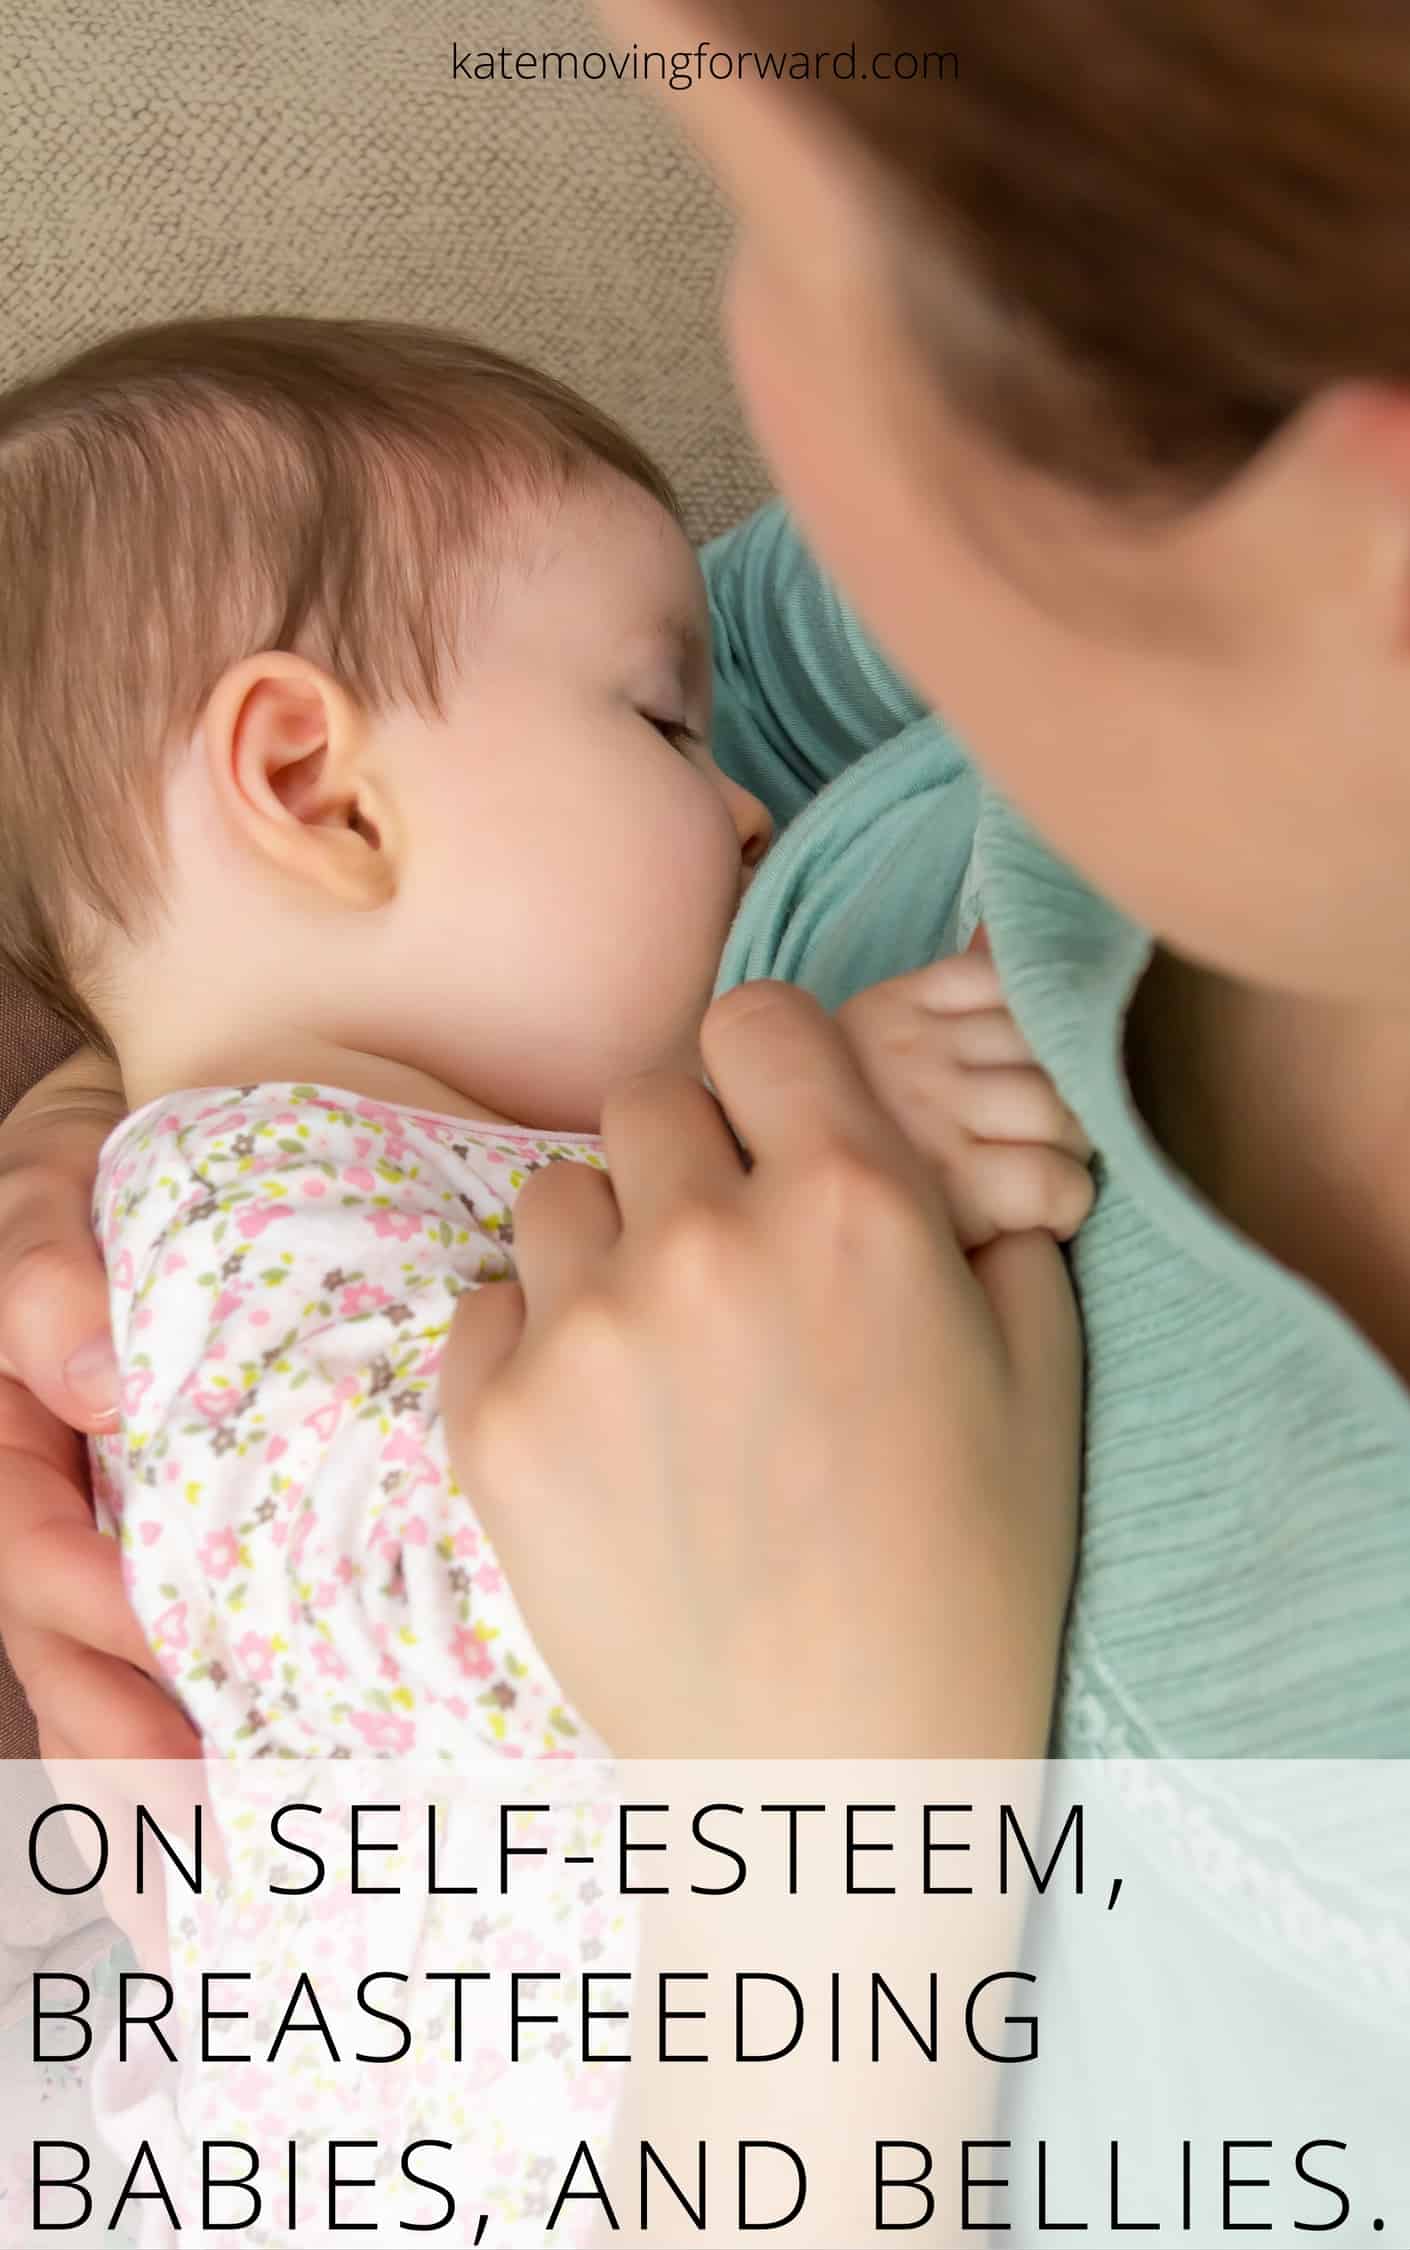 Breastfeeding and weight loss